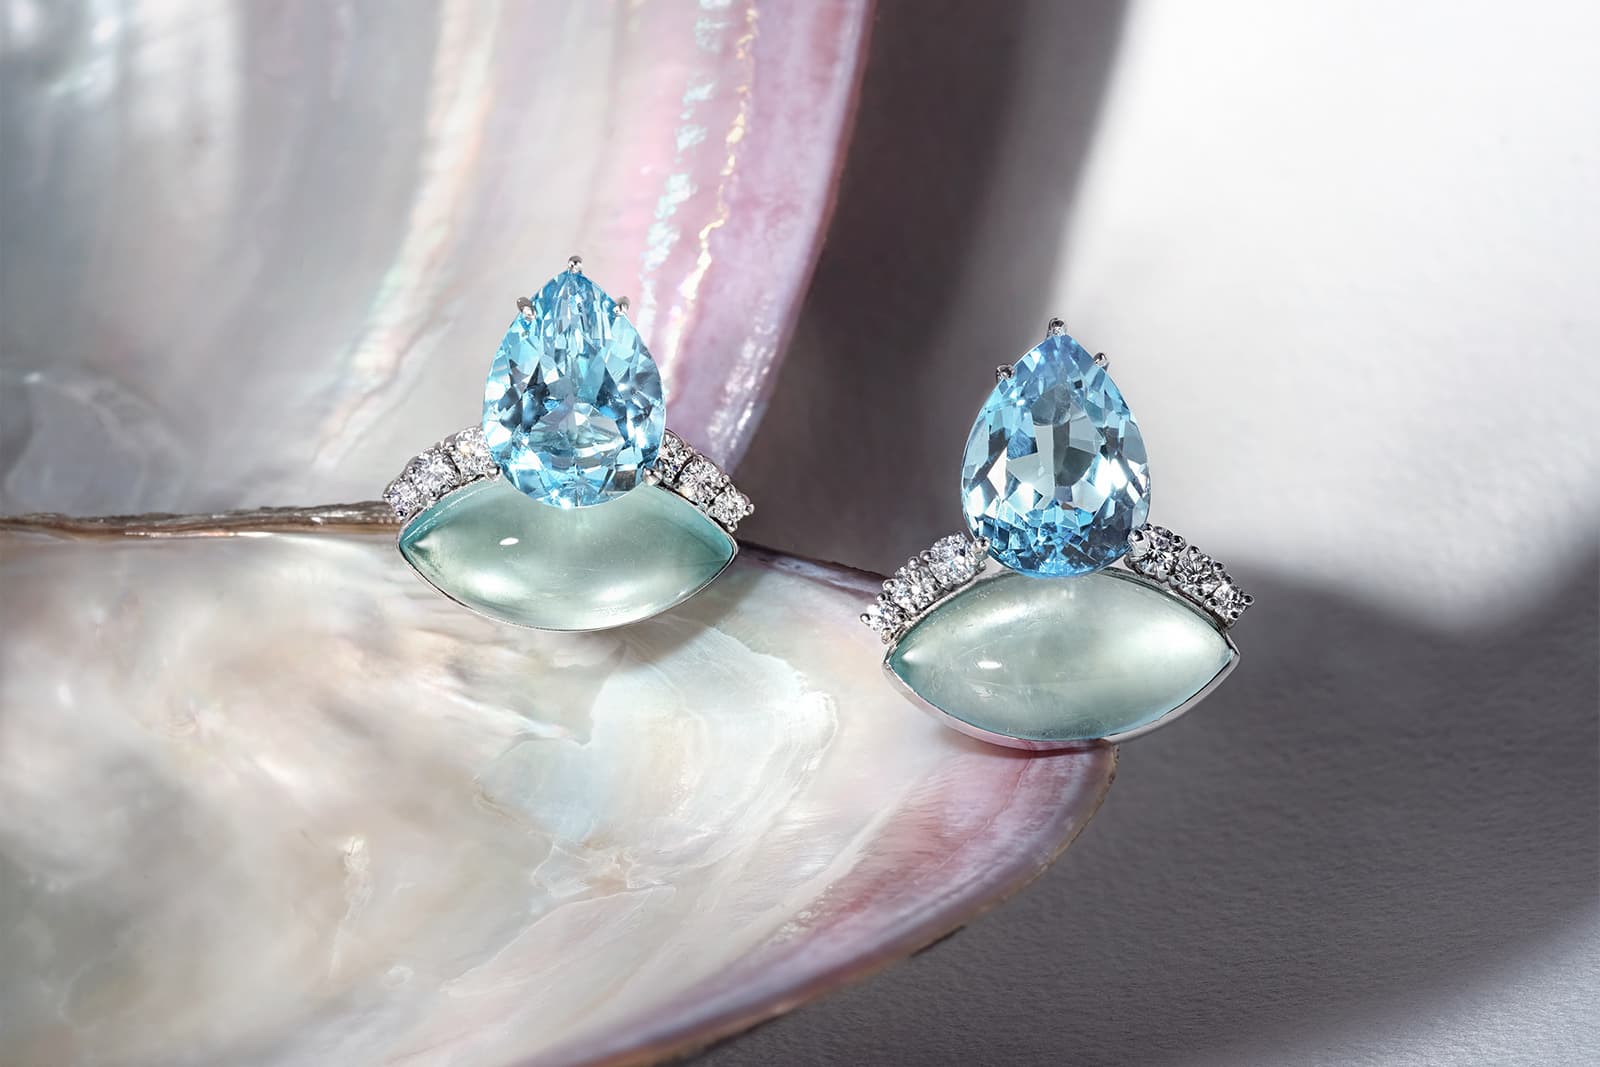 Sail Away With Me earrings with pear-shaped London blue topaz, marquise-shaped aquamarine cabochon and 1.36cts of white diamonds